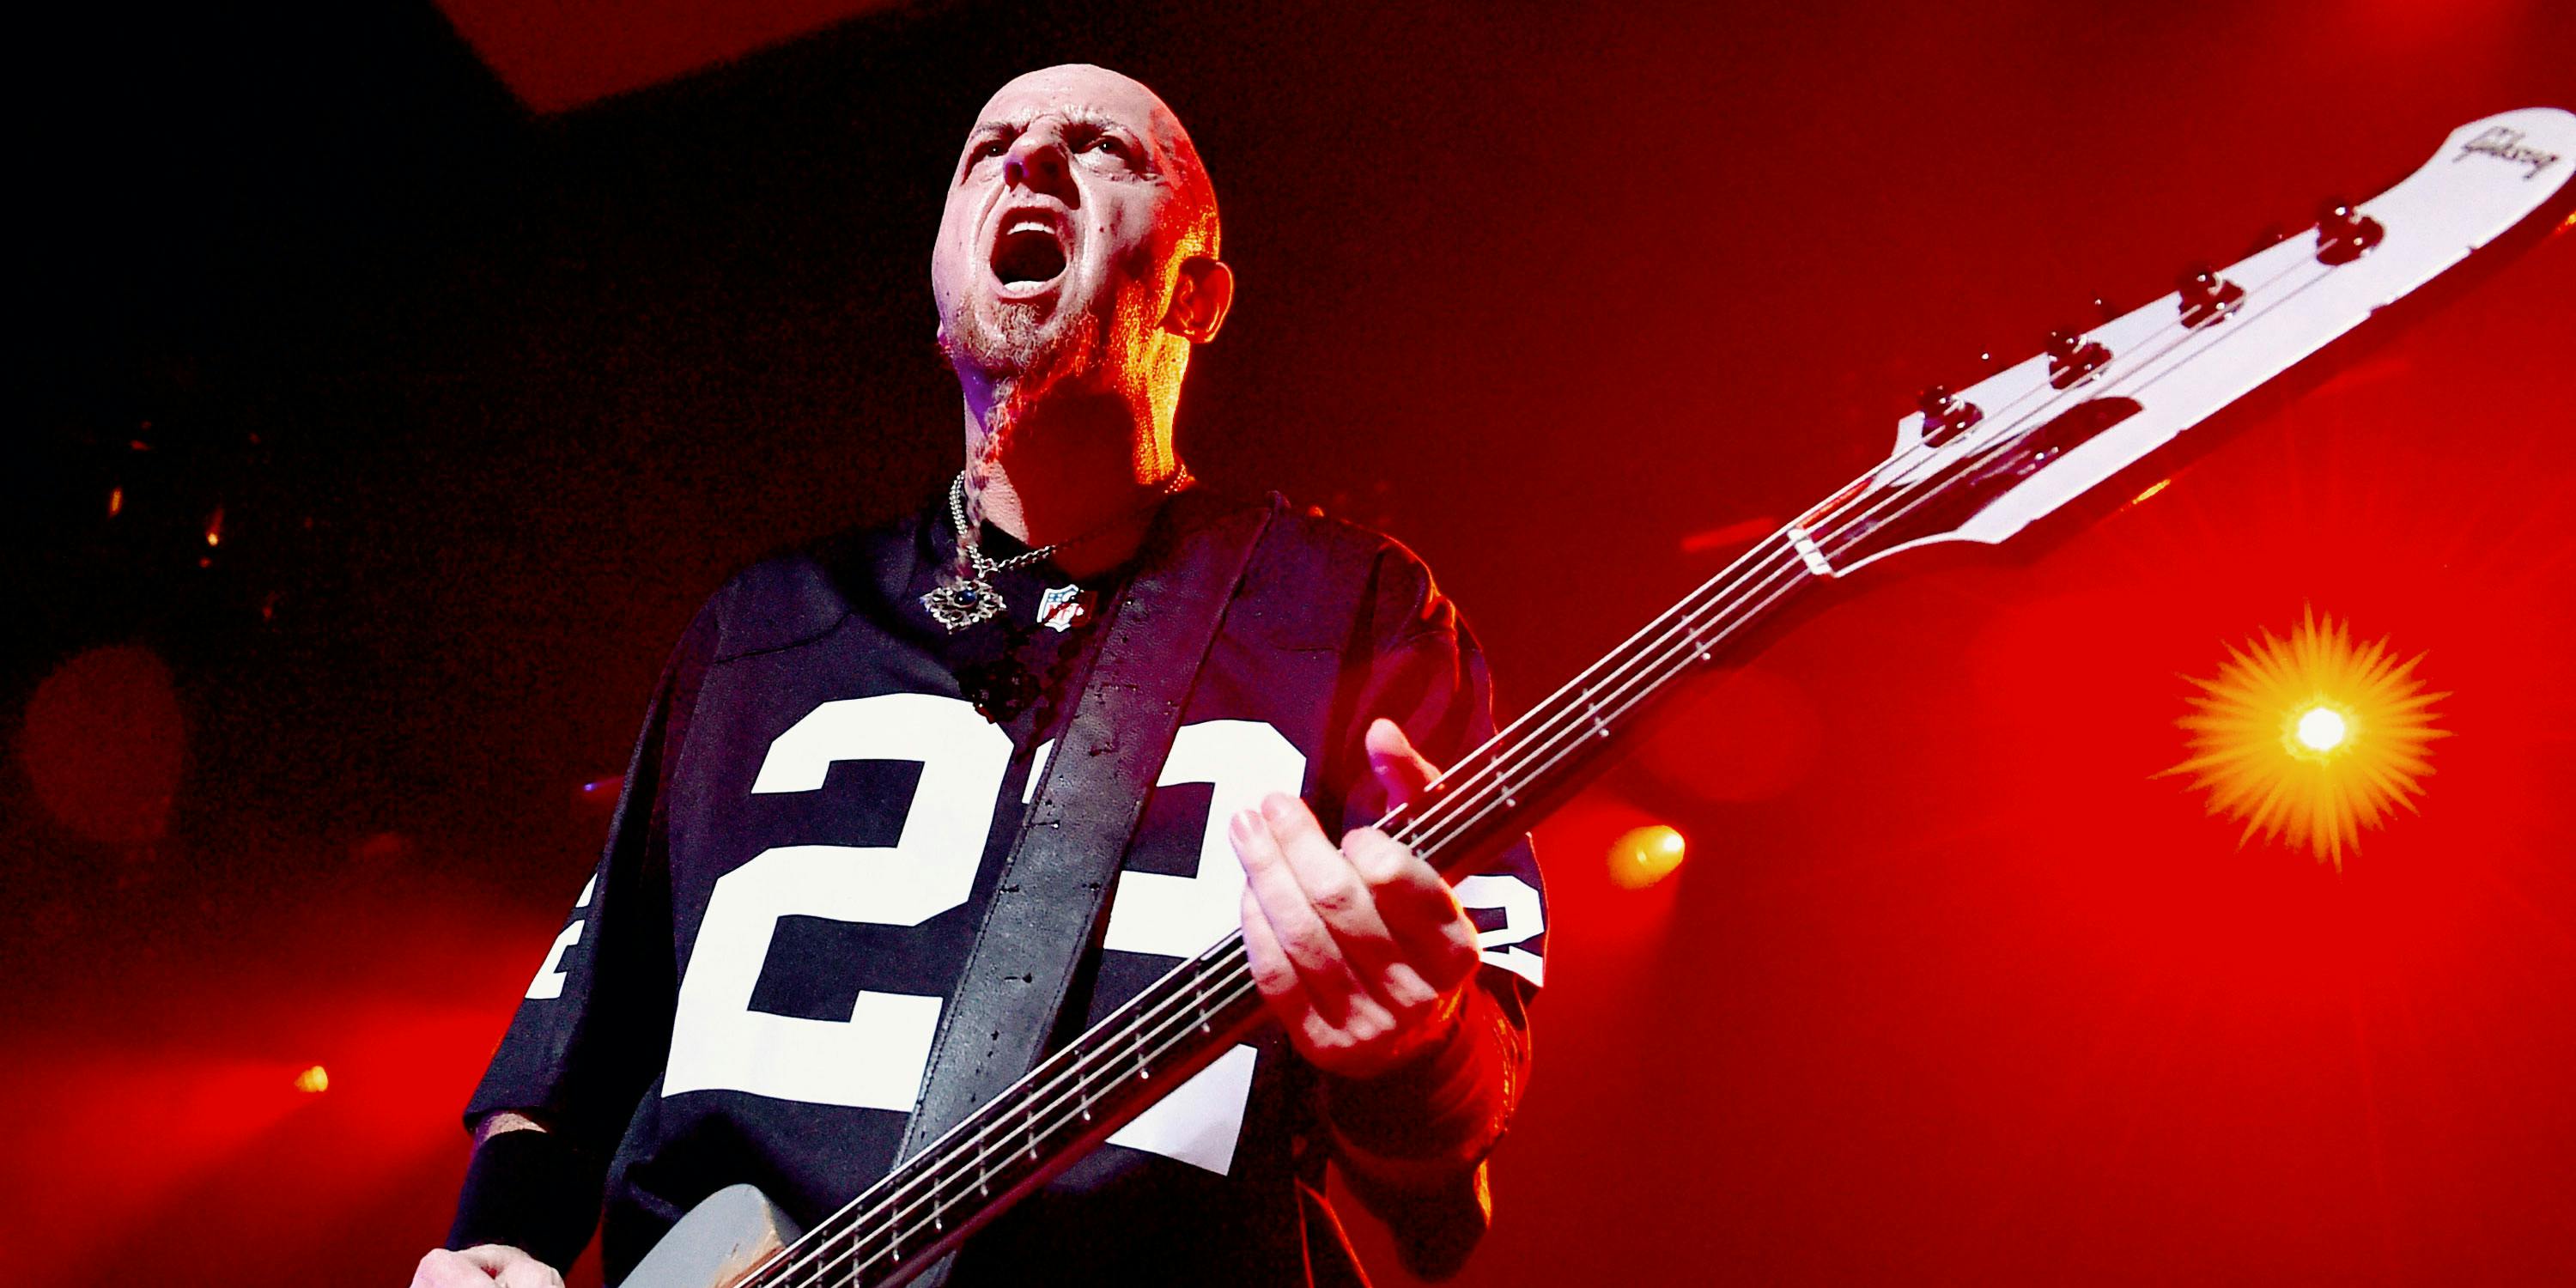 System of a Down Bassist Gets Into Weed With 22Red. Here, he is shown performing at The Forum on April 6, 2015 in Inglewood, California.